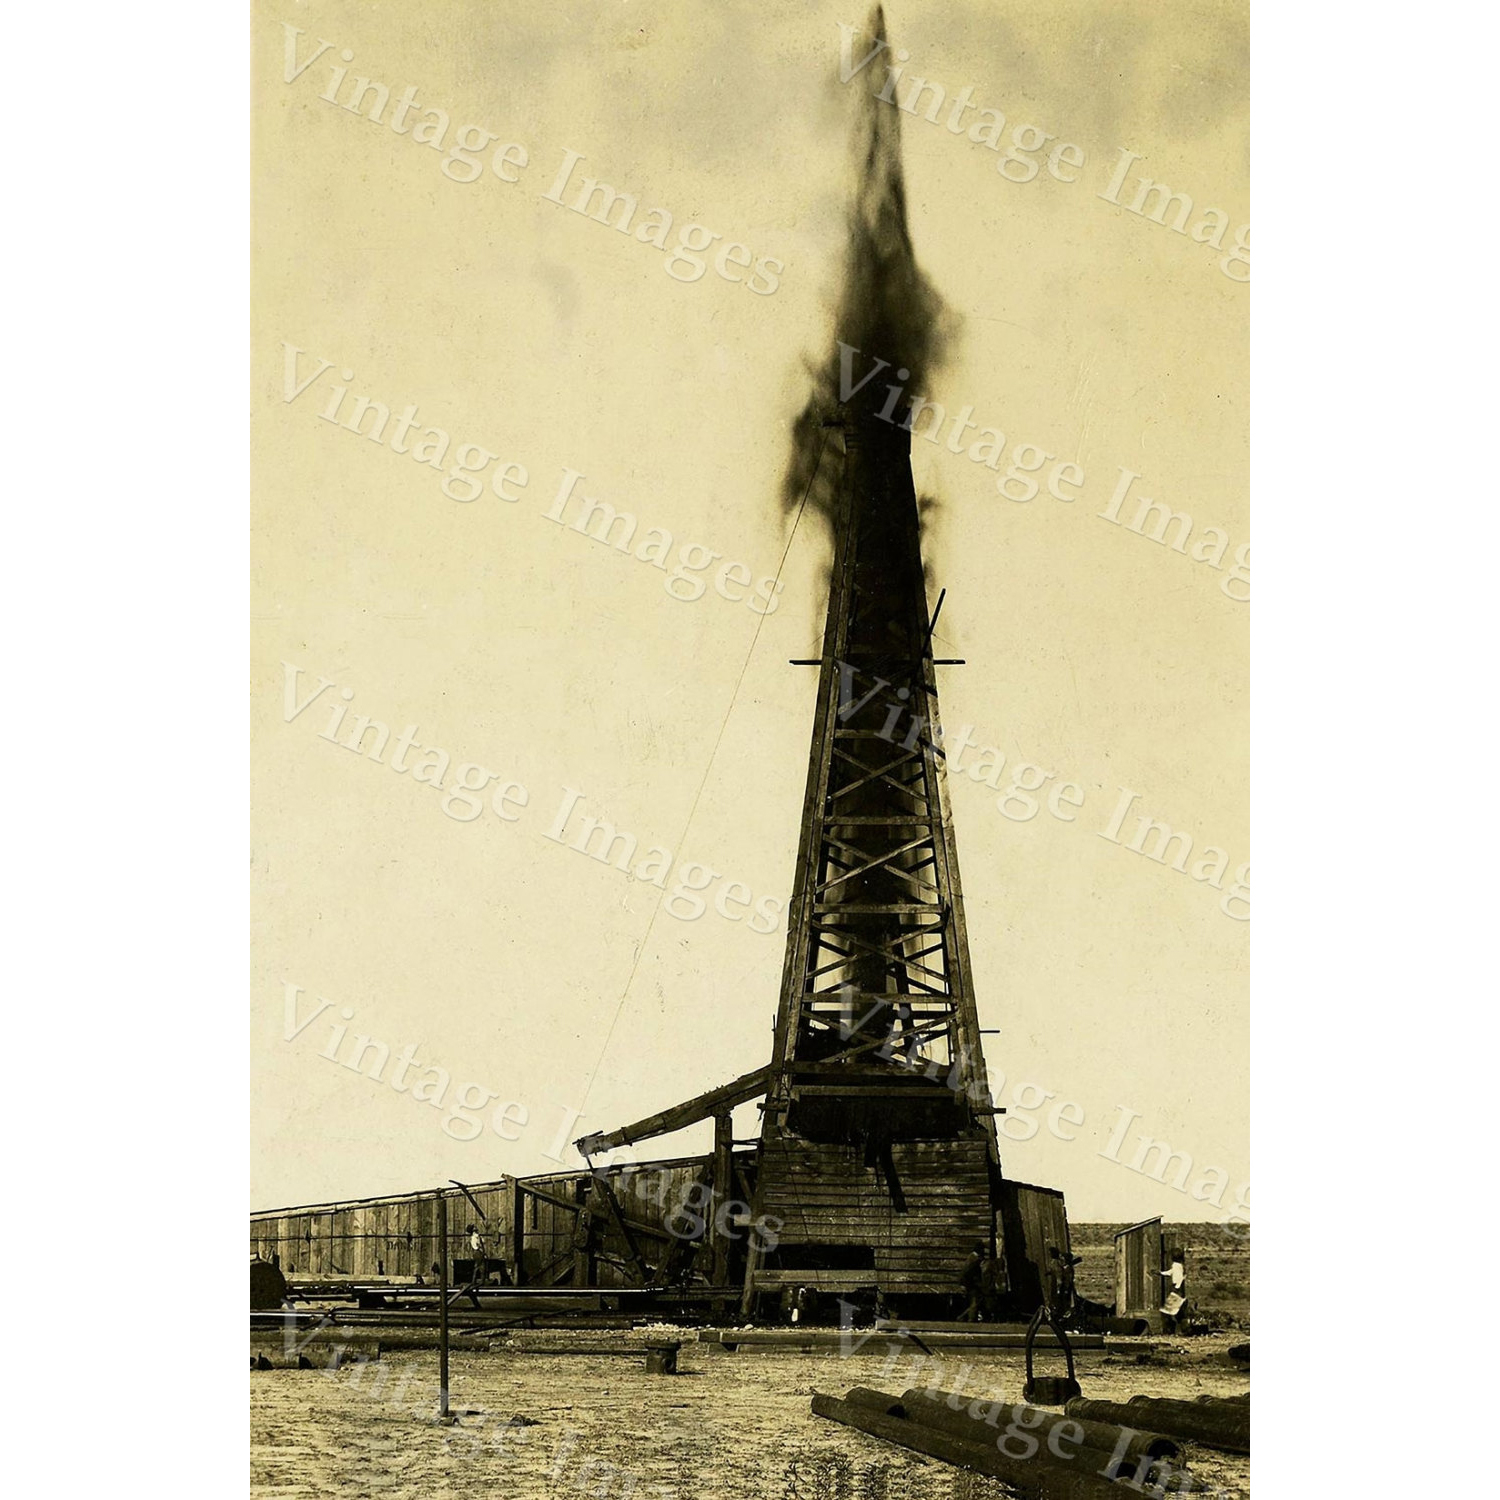 Vintage Imagery old oil well Photo drill drilling rig derrick gushing oil field sepia tone photo wall  Texas oil gusher Photo Vintage